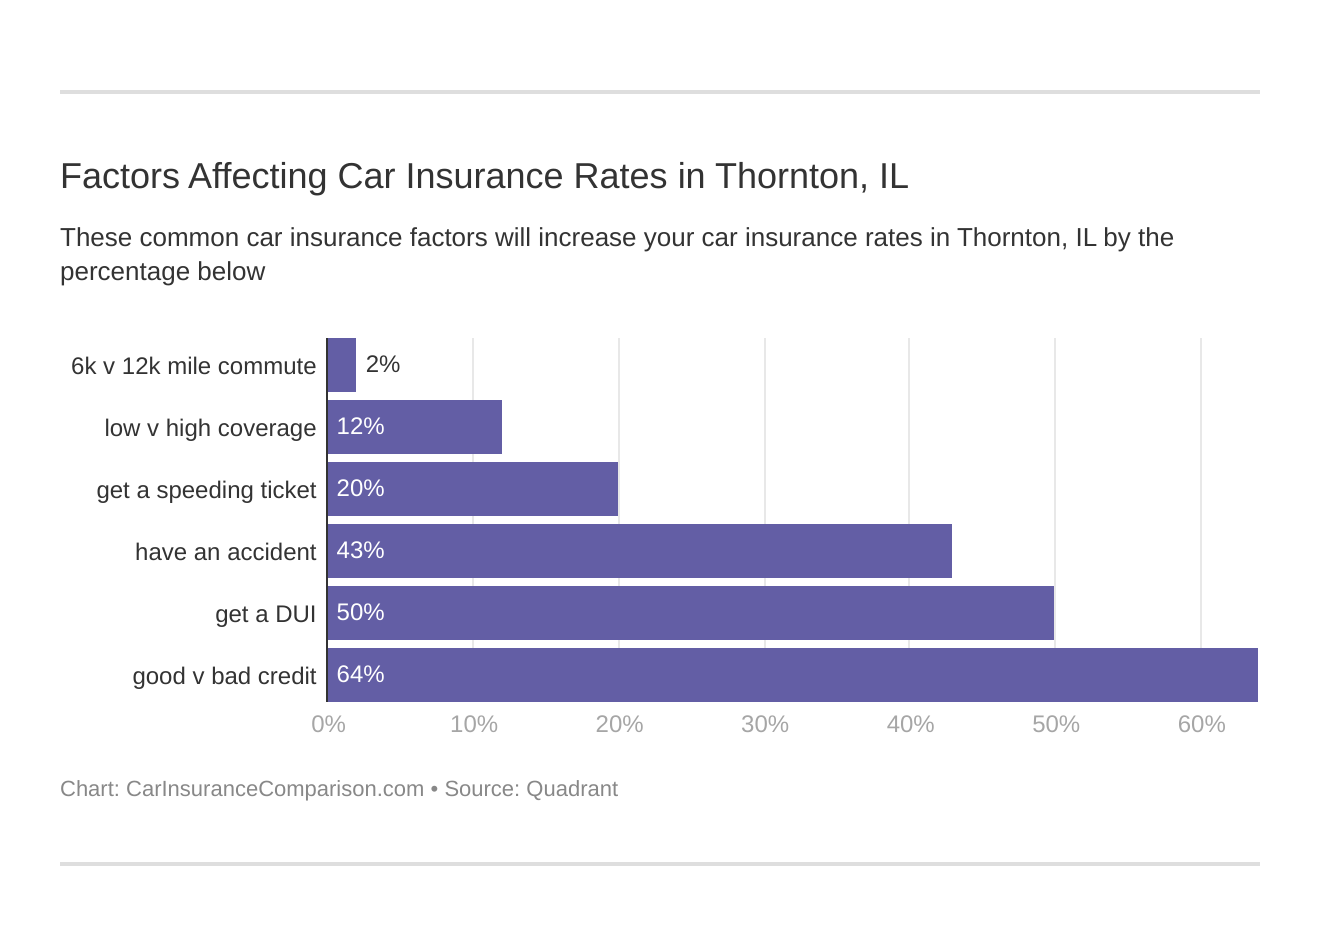 Factors Affecting Car Insurance Rates in Thornton, IL